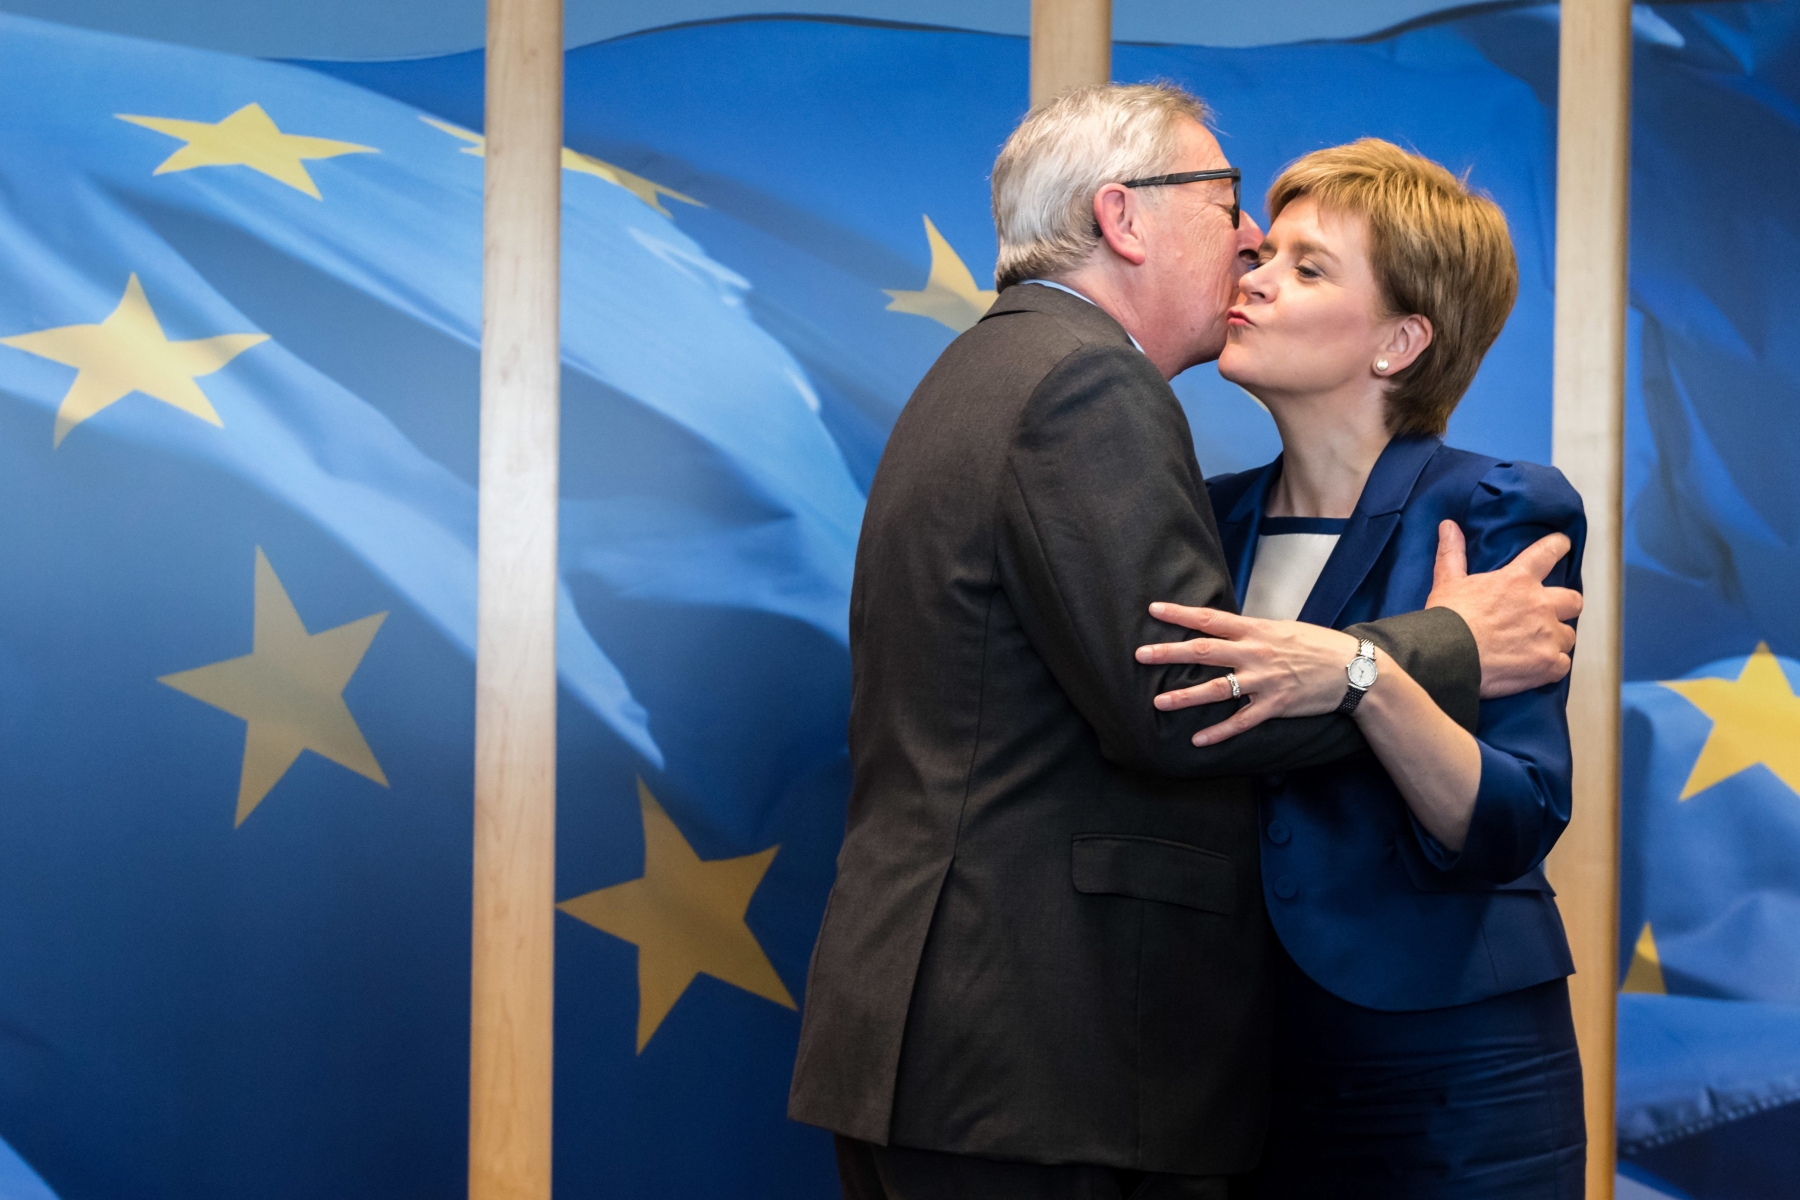 European Commission President Jean-Claude Juncker, left, greets Scottish First Minister Nicola Sturgeon upon her arrival at his office at EU headquarters in Brussels, Wednesday, June 29, 2016. Sturgeon is in Brussels to meet with EU officials.  Scottish voters overwhelmingly chose to remain in the European Union but were drowned out by English voters. Sturgeon has indicated there may be a new referendum on Scottish independence. (AP Photo/Geert Vanden Wijngaert) APTOPIX Belgium Britain EU